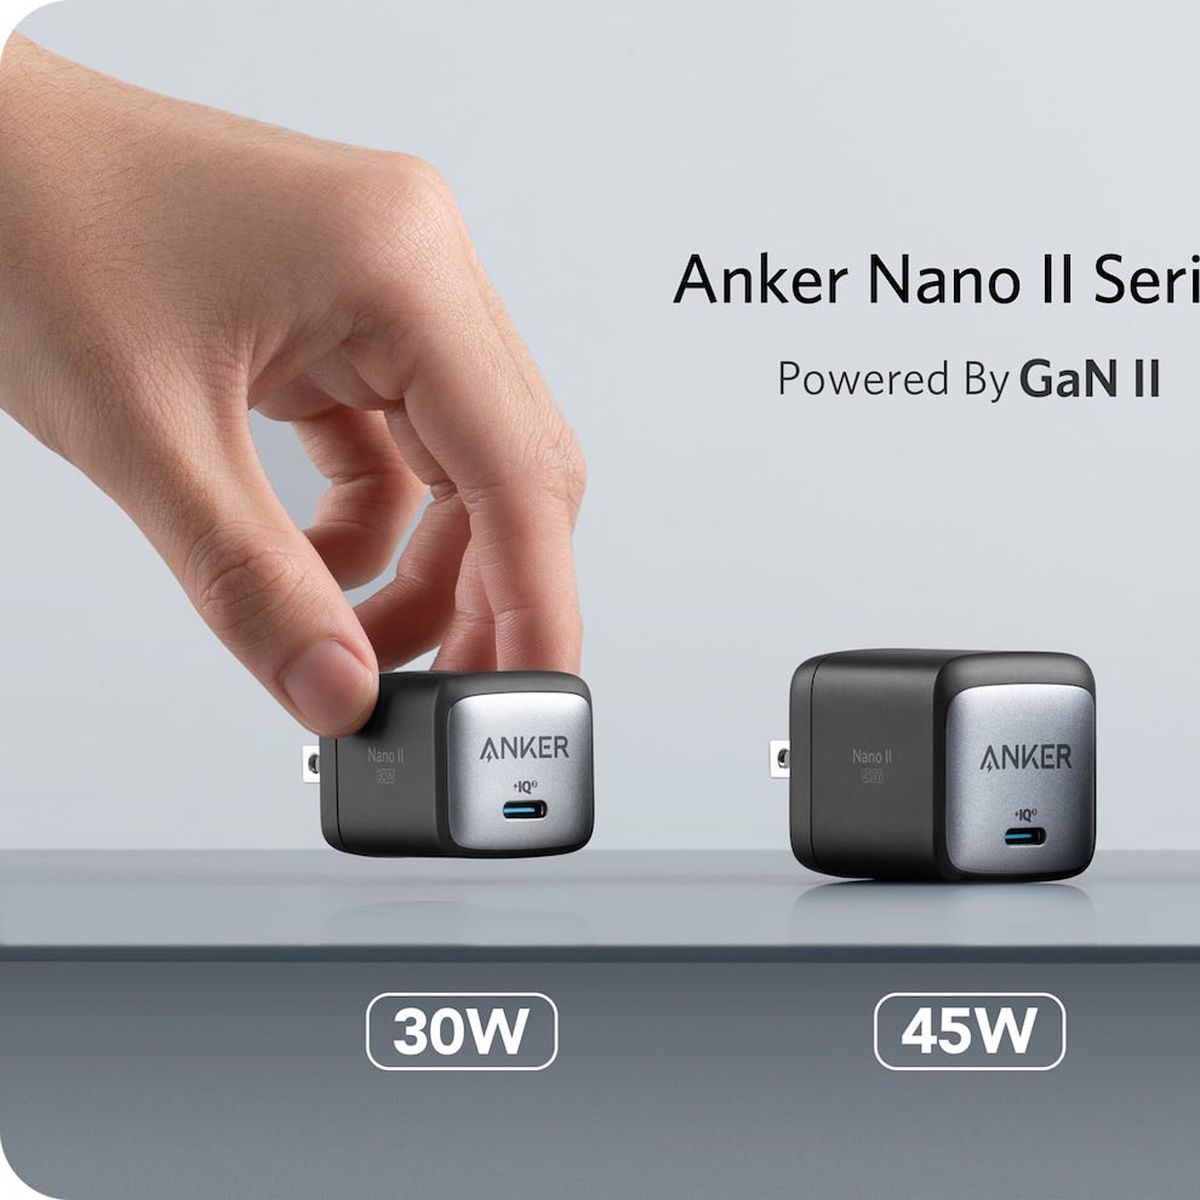 Anker's Nano II Chargers Pack Up to 65W of Power in a Smaller Design -